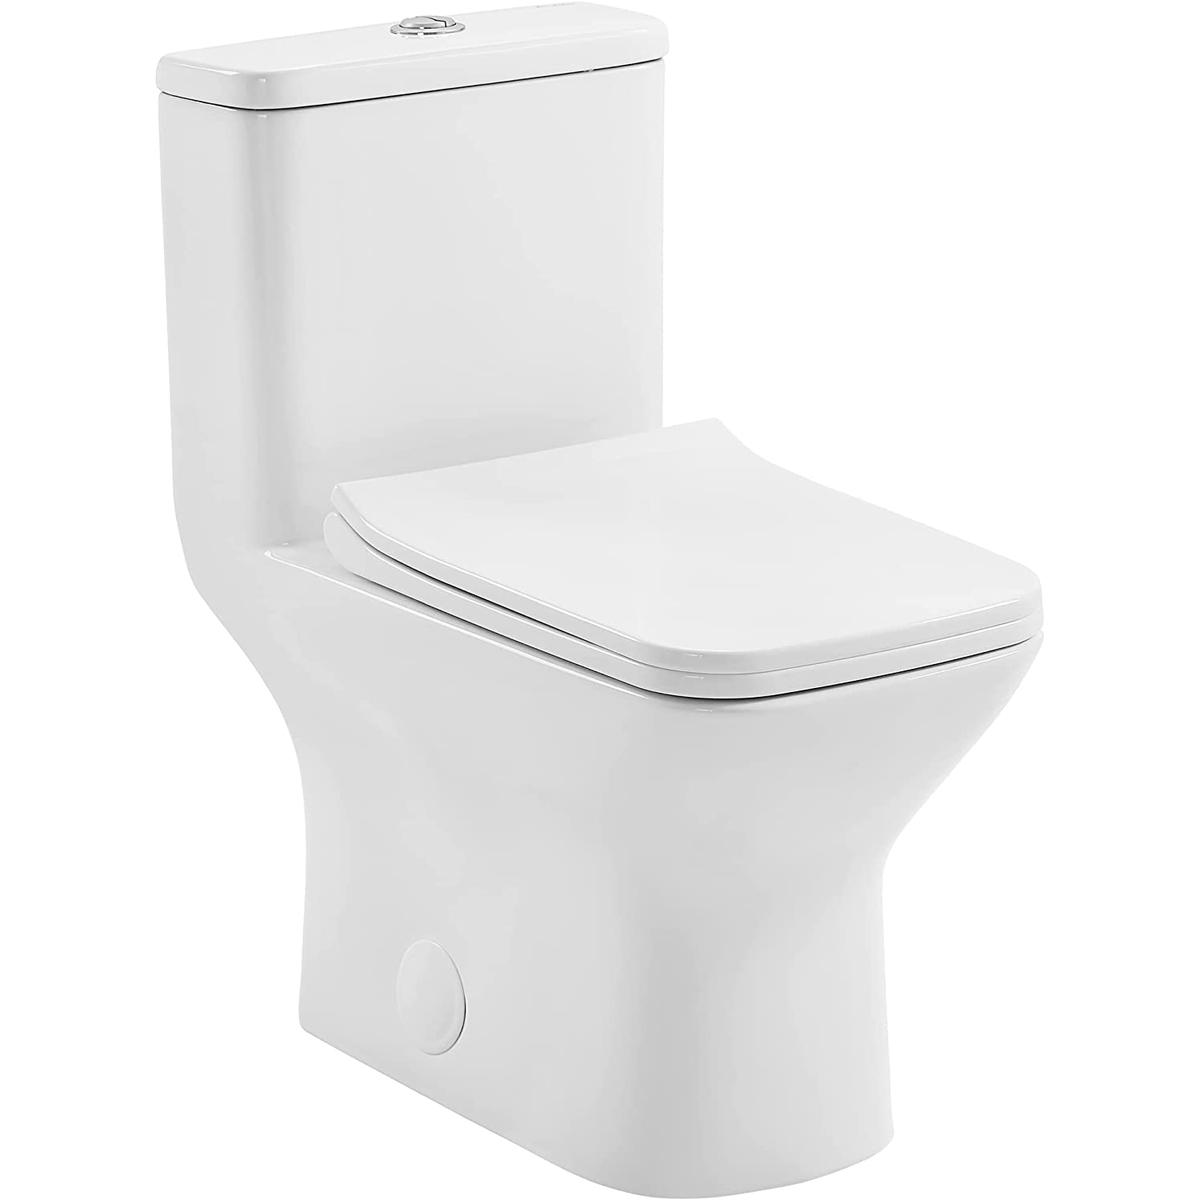 Swiss Madison Carre One Piece Elongated Dual Flush Toilet for $178.09 Shipped